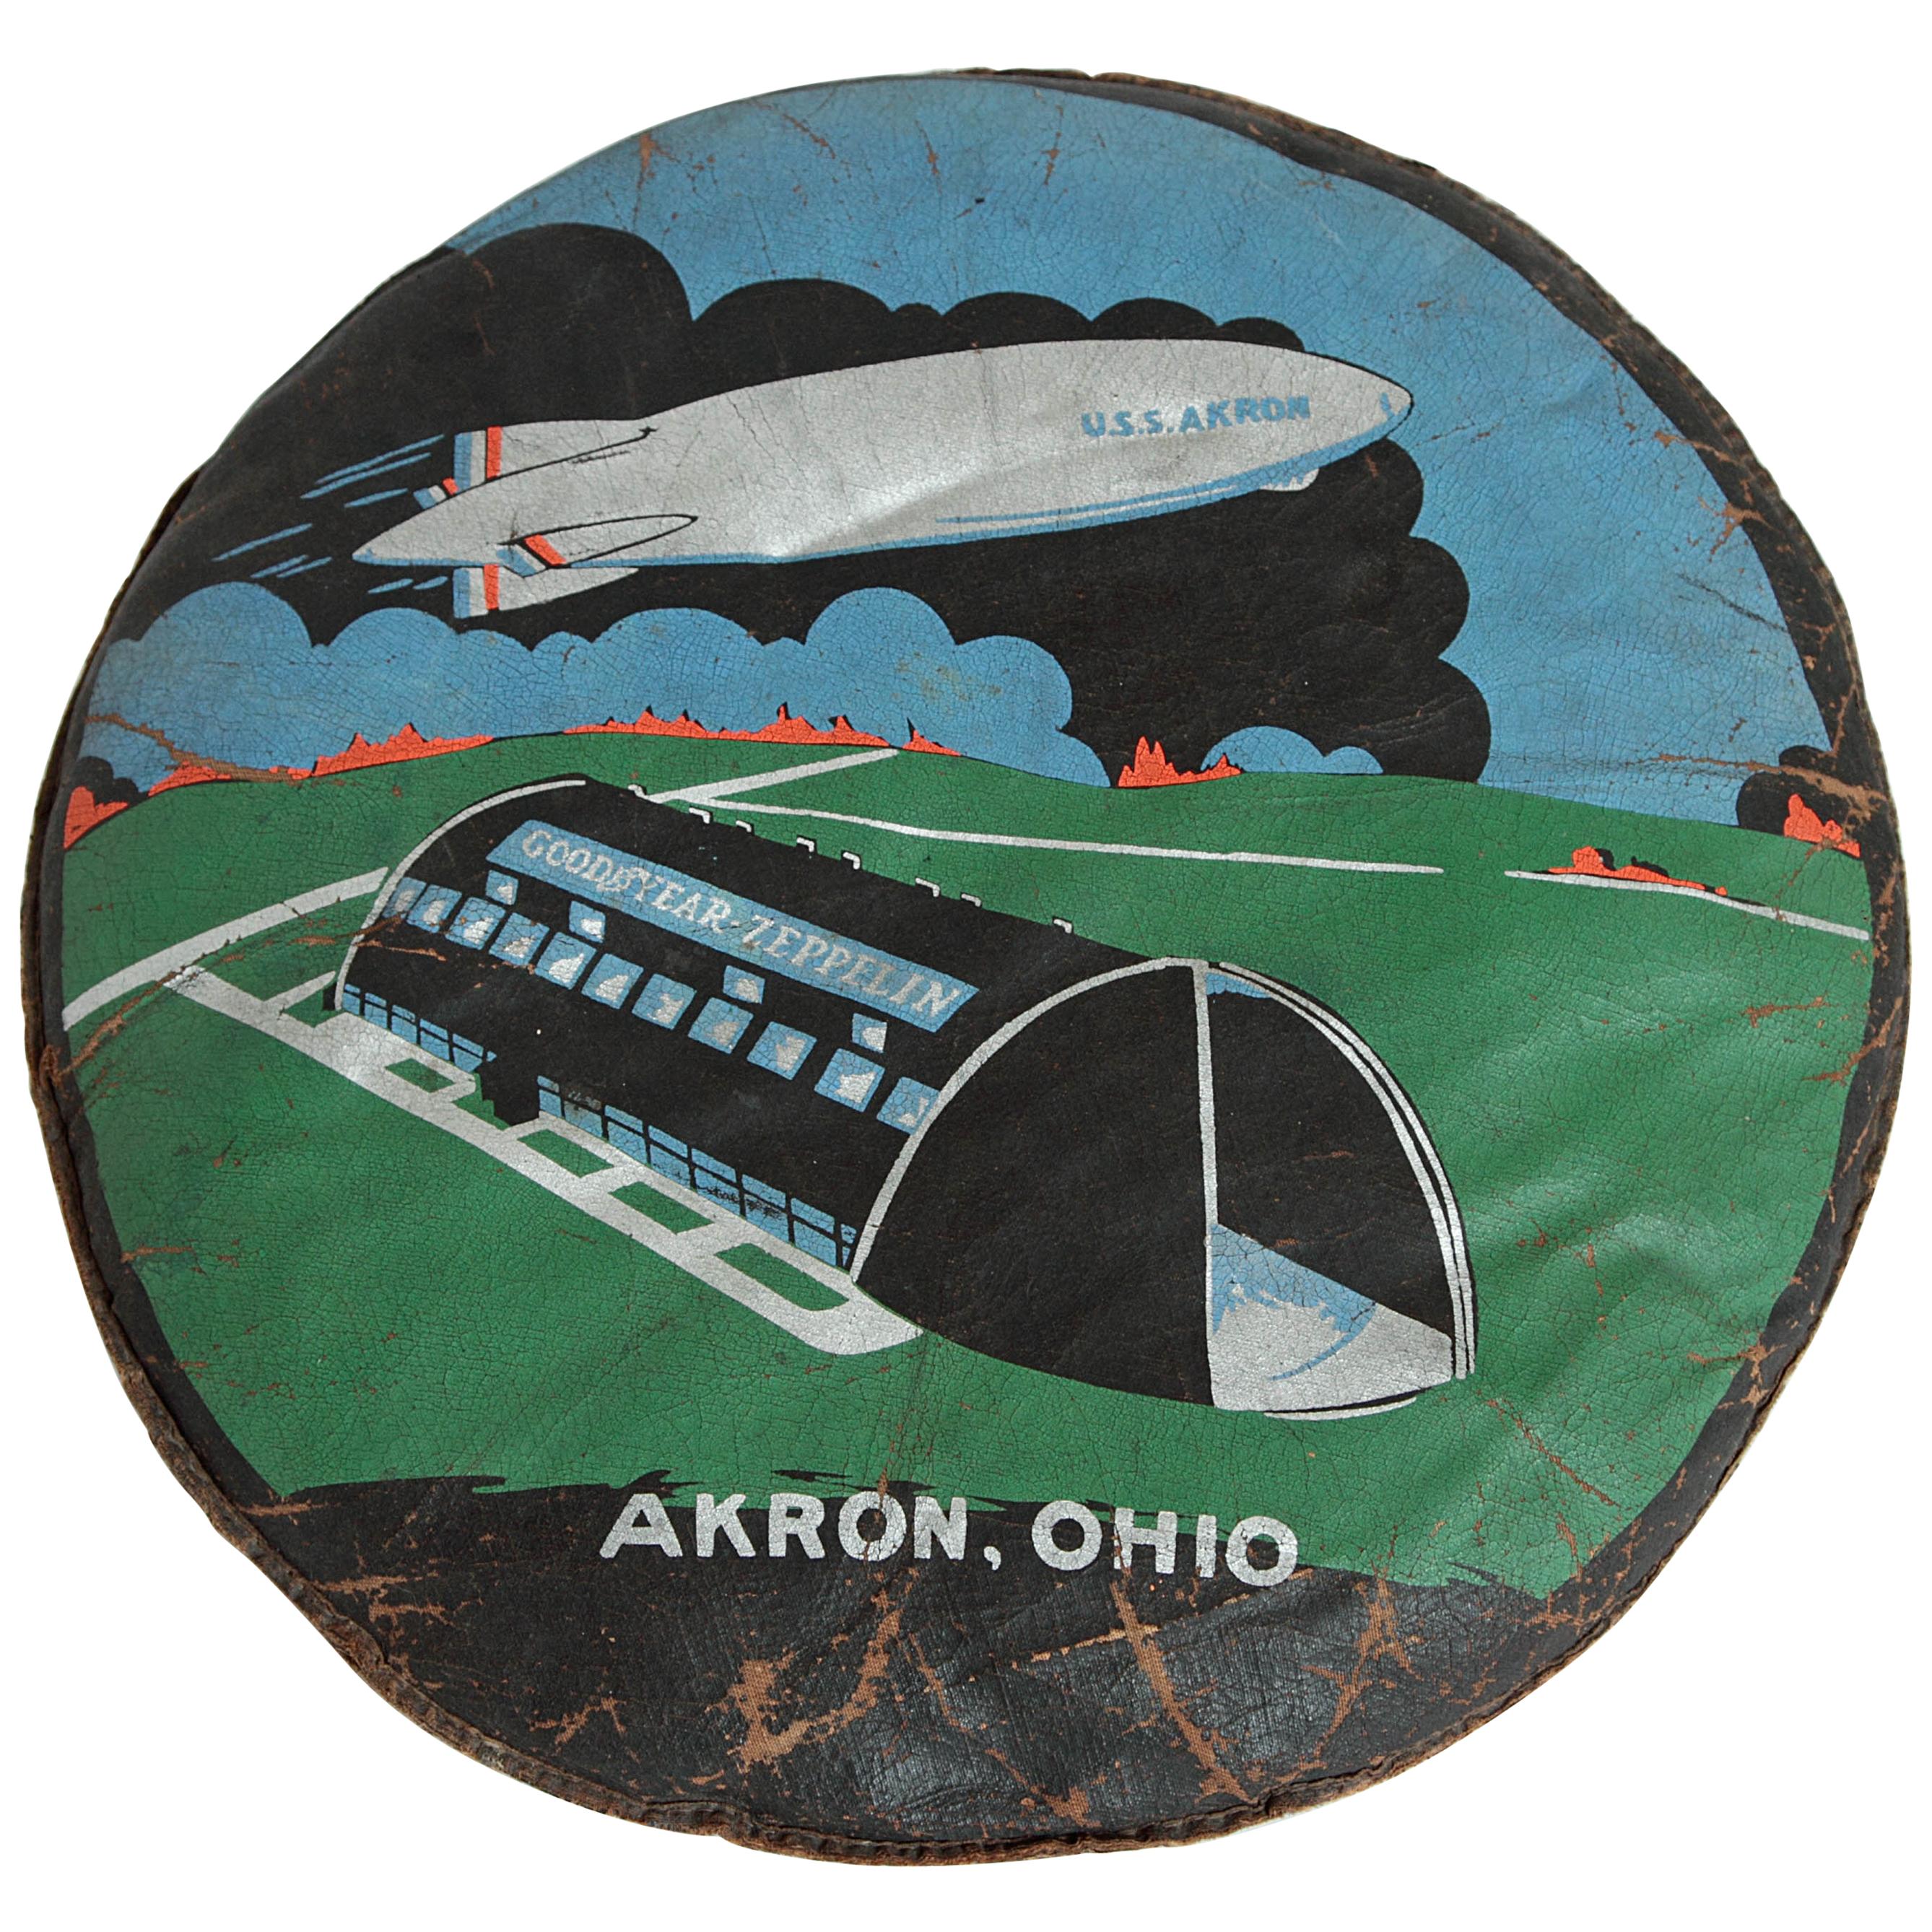 Machine Age Art Deco U.S.S. Akron Goodyear Zeppelin Cushion Price Reduced For Sale